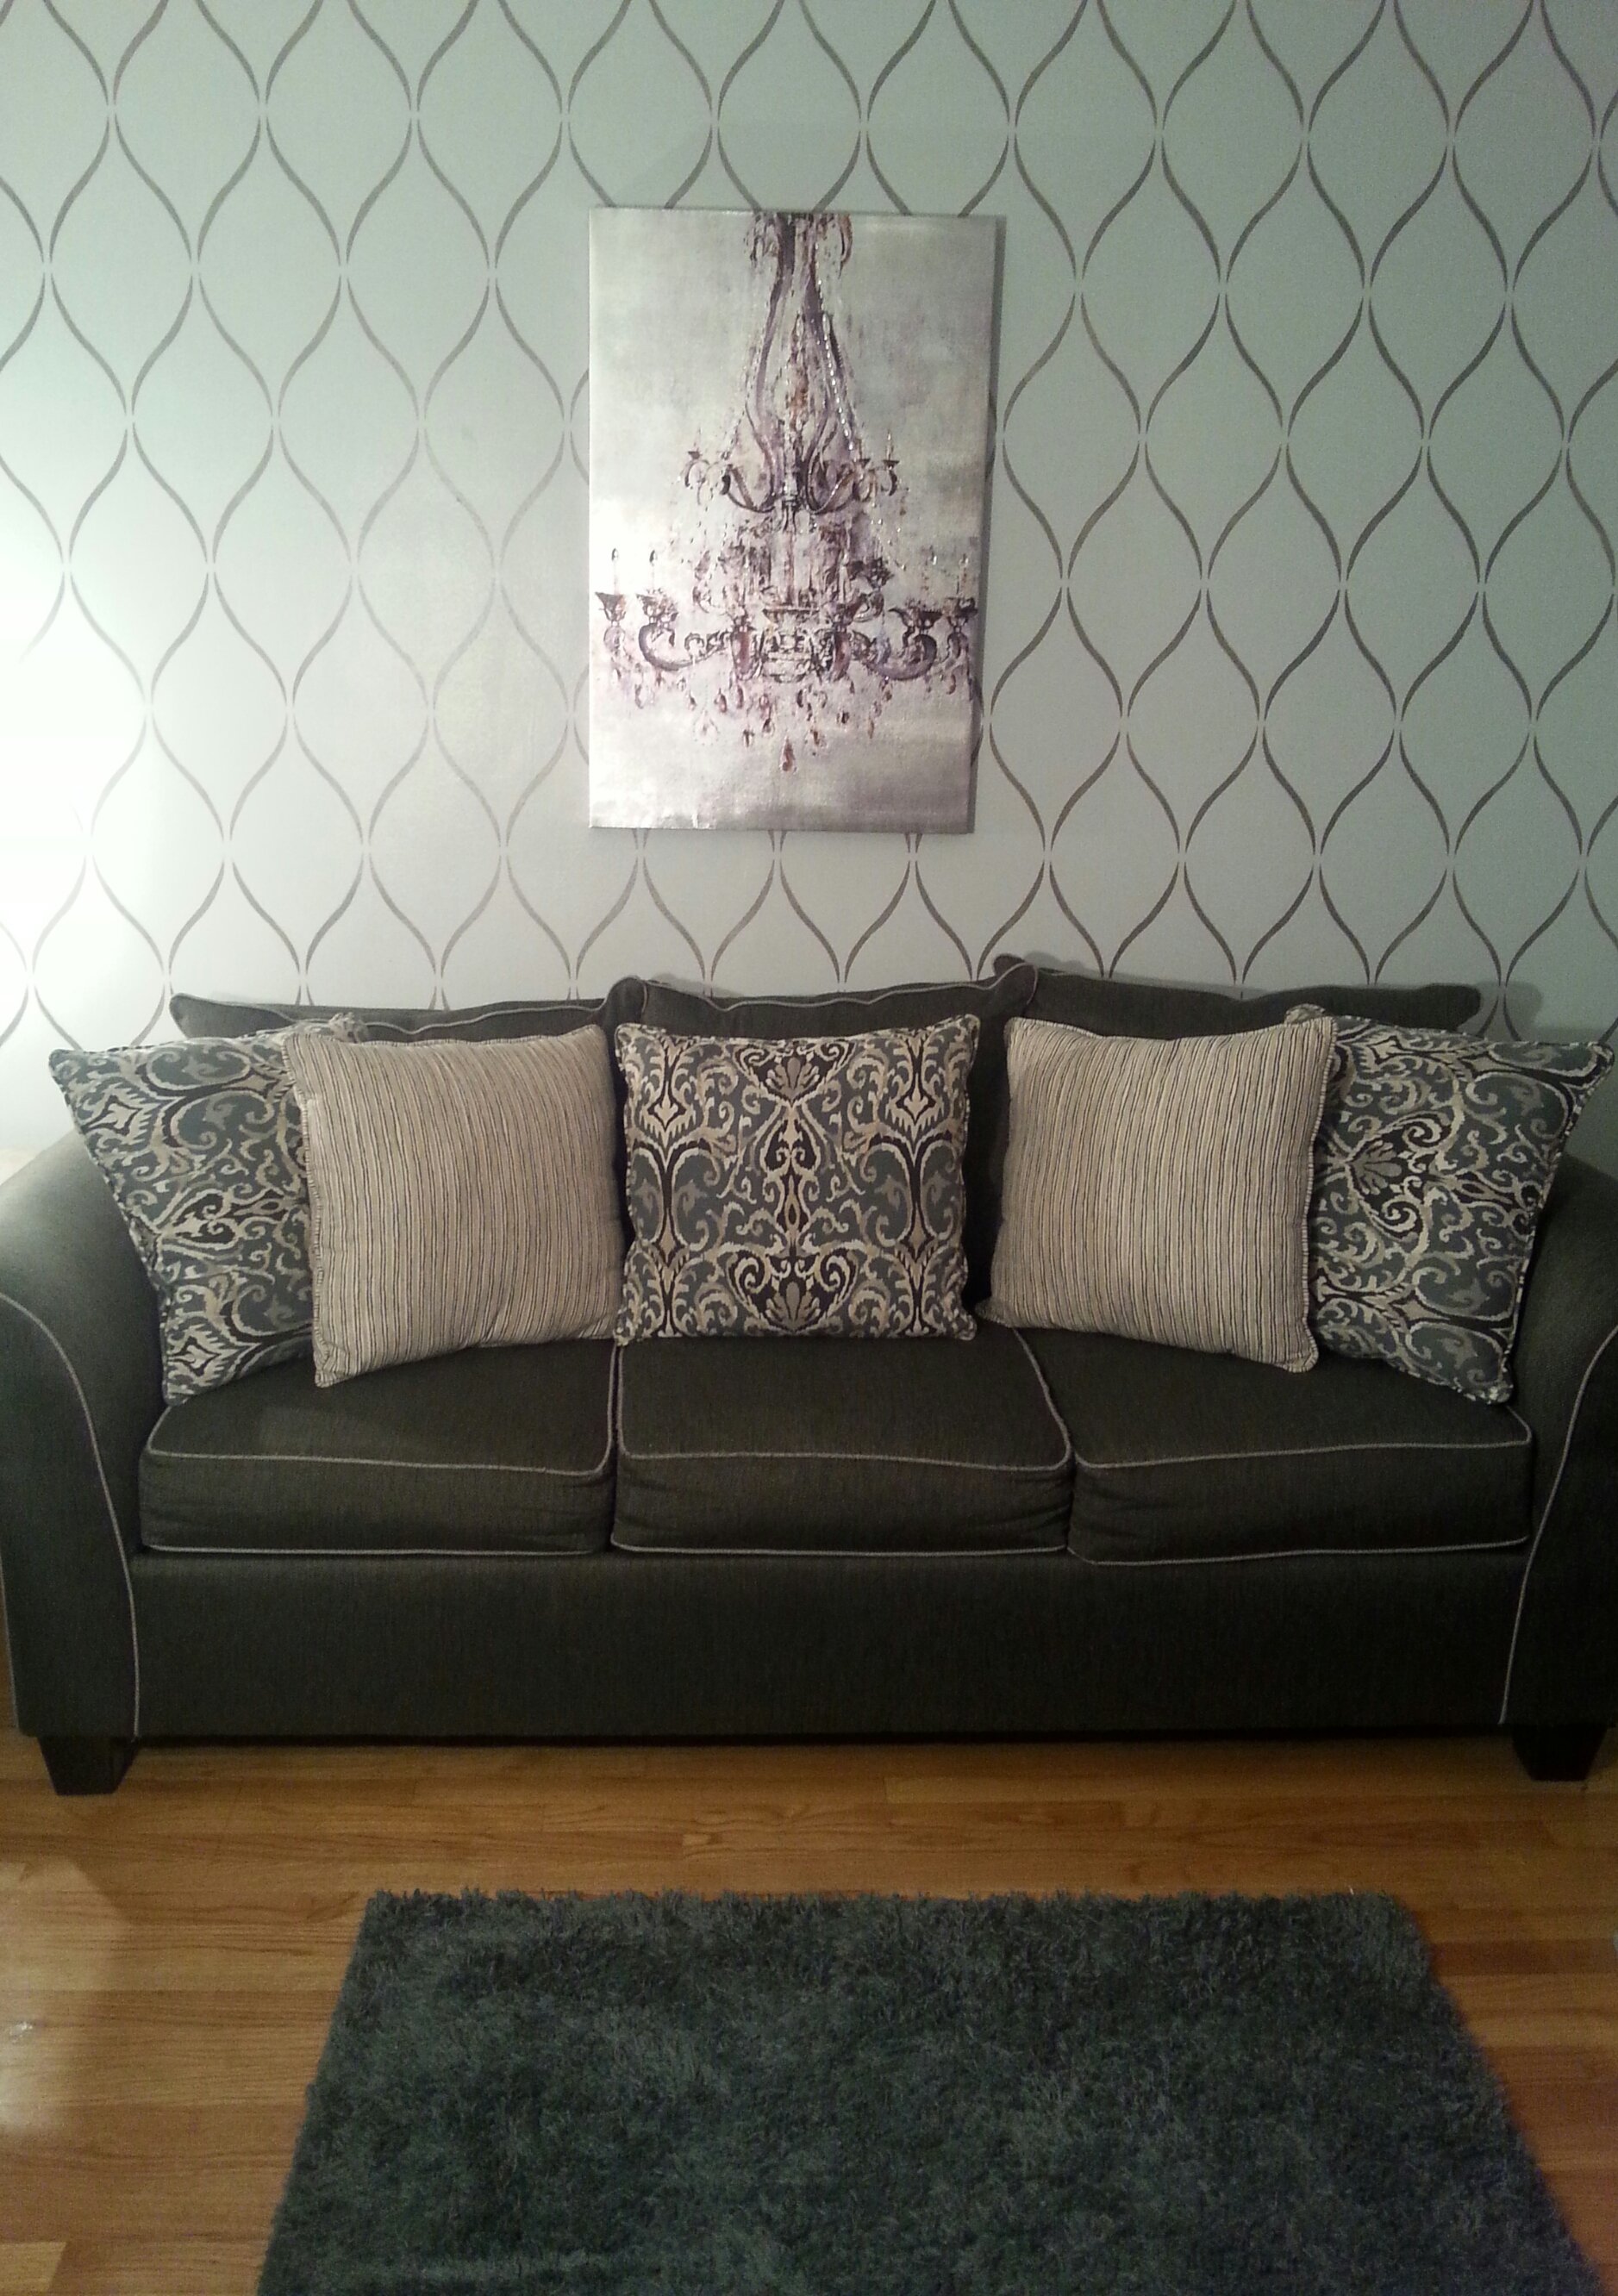 A DIY stenciled living room accent wall using the Serenity Allover Stencil from Cutting Edge Stencils. http://www.cuttingedgestencils.com/serenity-allover-stencil-trellis-design-wall-pattern-diy-decor.html